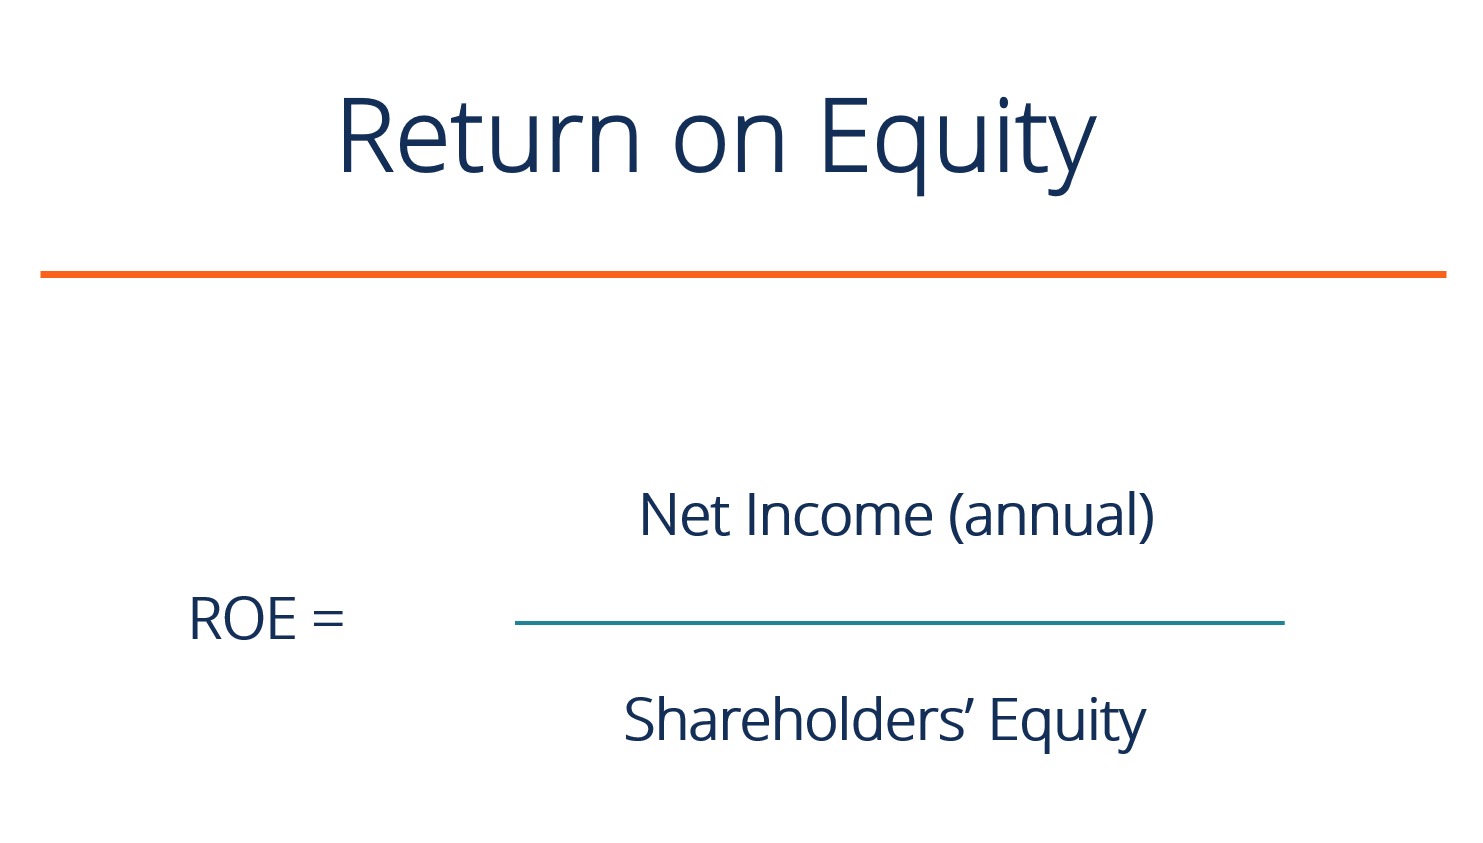 What is Return on Equity (ROE) and why is it important for shareholders?